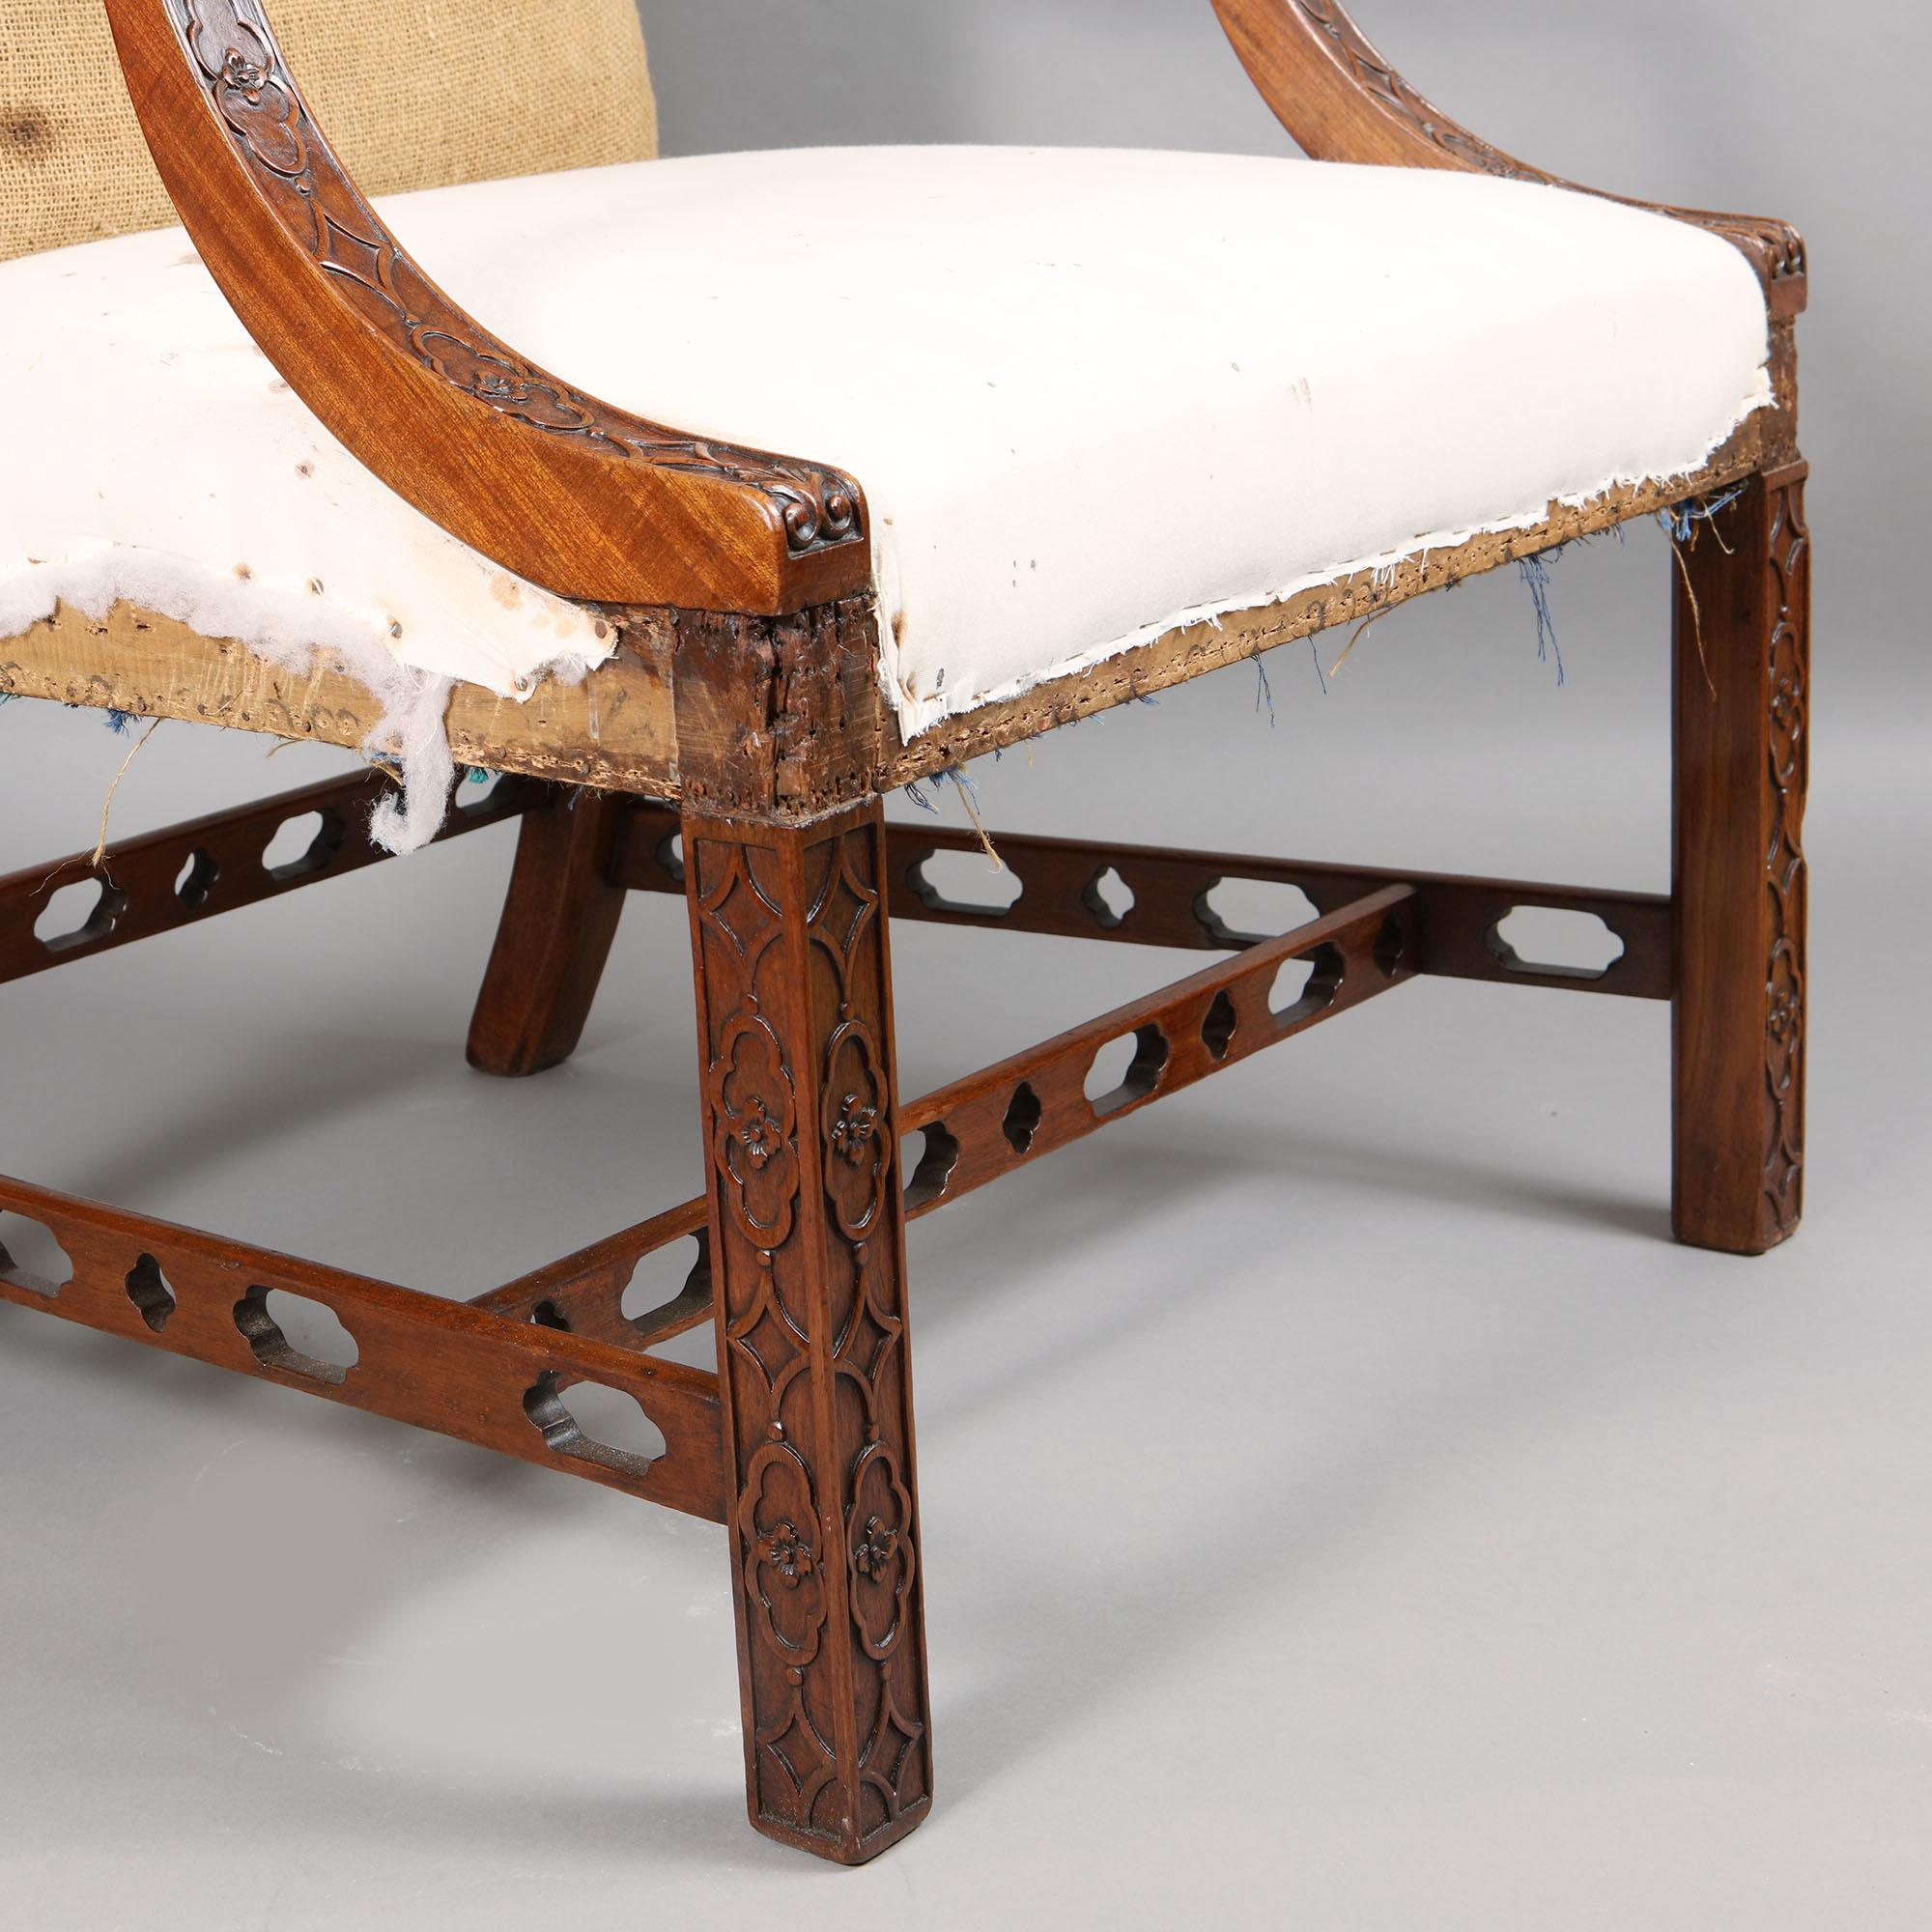 Hand-Carved 18th Century Pair of George III Mahogany Fretwork Gainsborough Armchairs